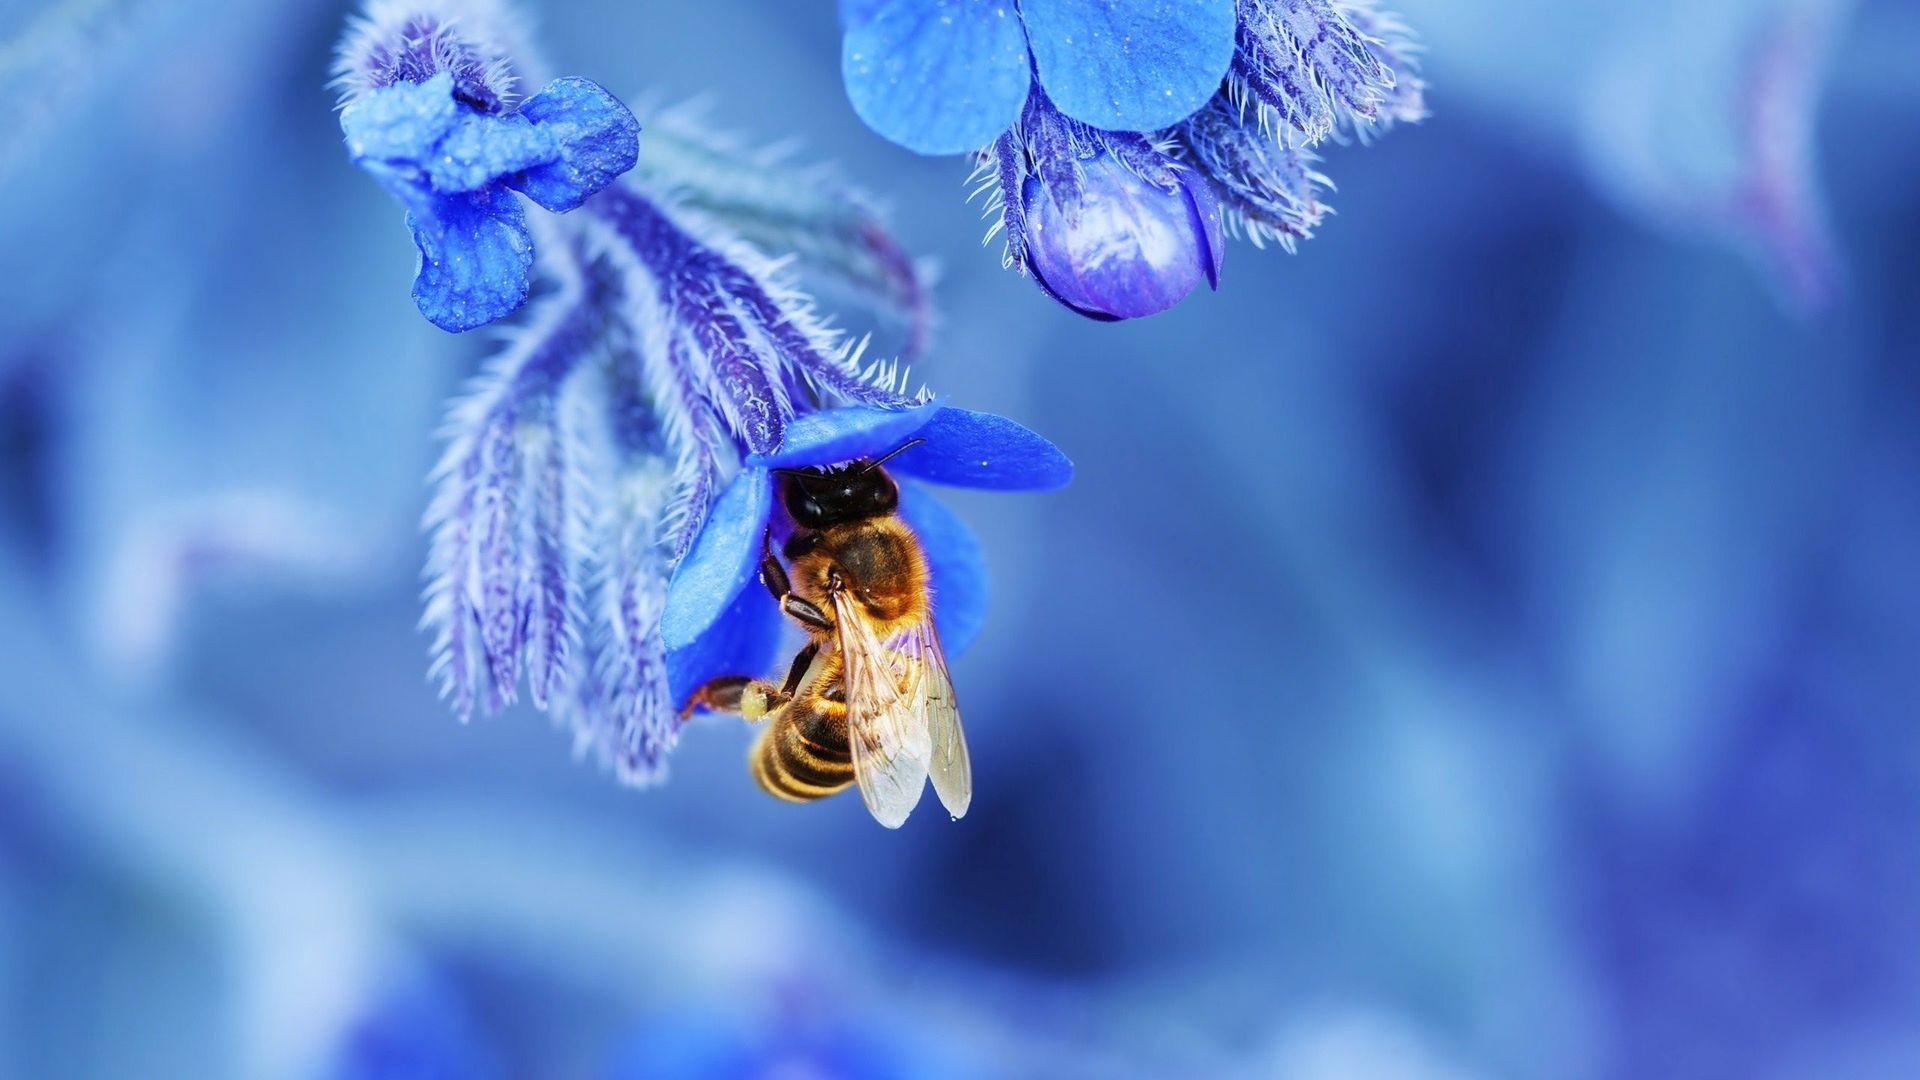 General 1920x1080 nature macro depth of field bees insect flowers blue blossoms wings animals closeup plants